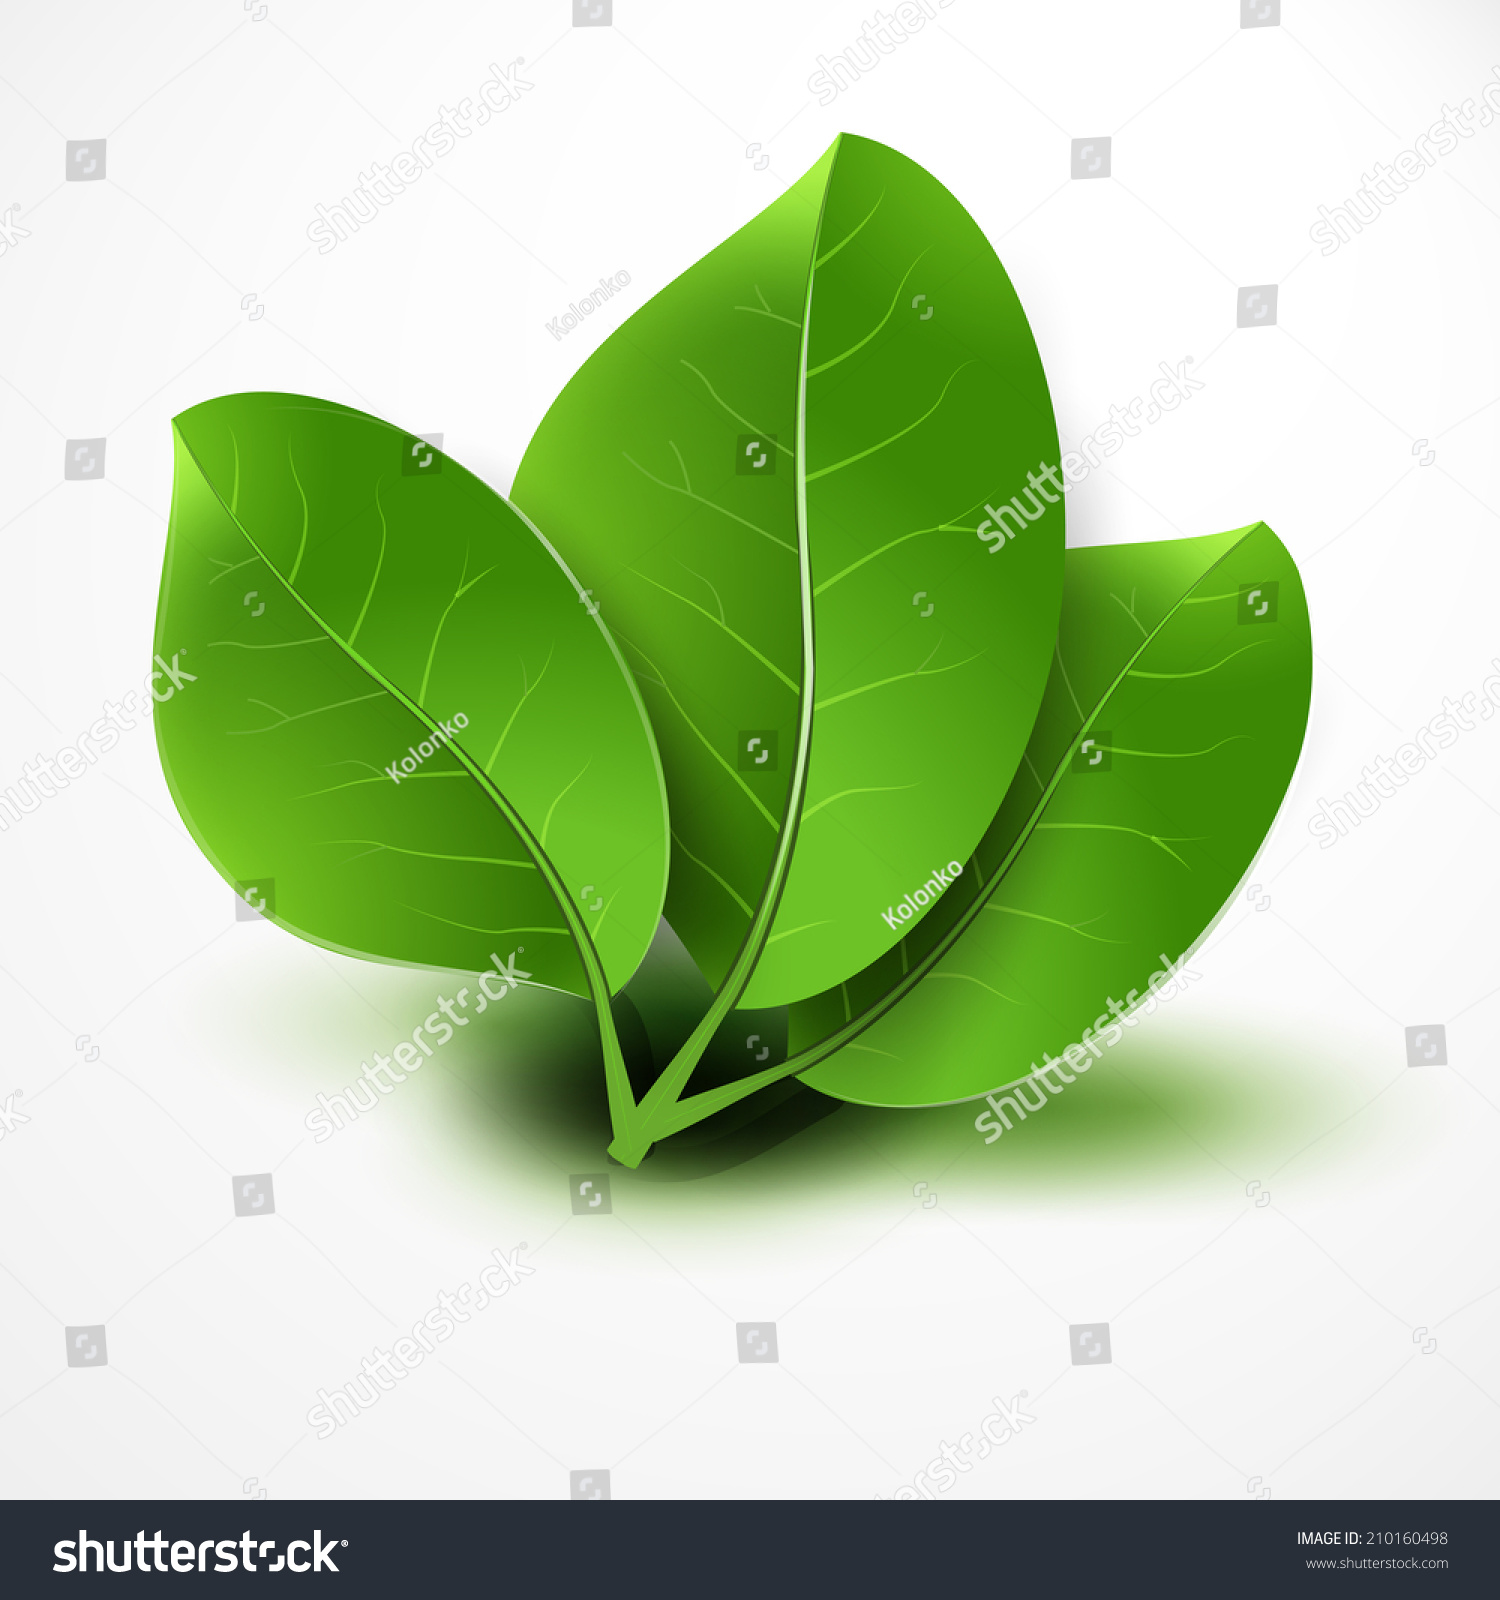 Abstract Green Leafs Background Stock Illustration 210160498 ...